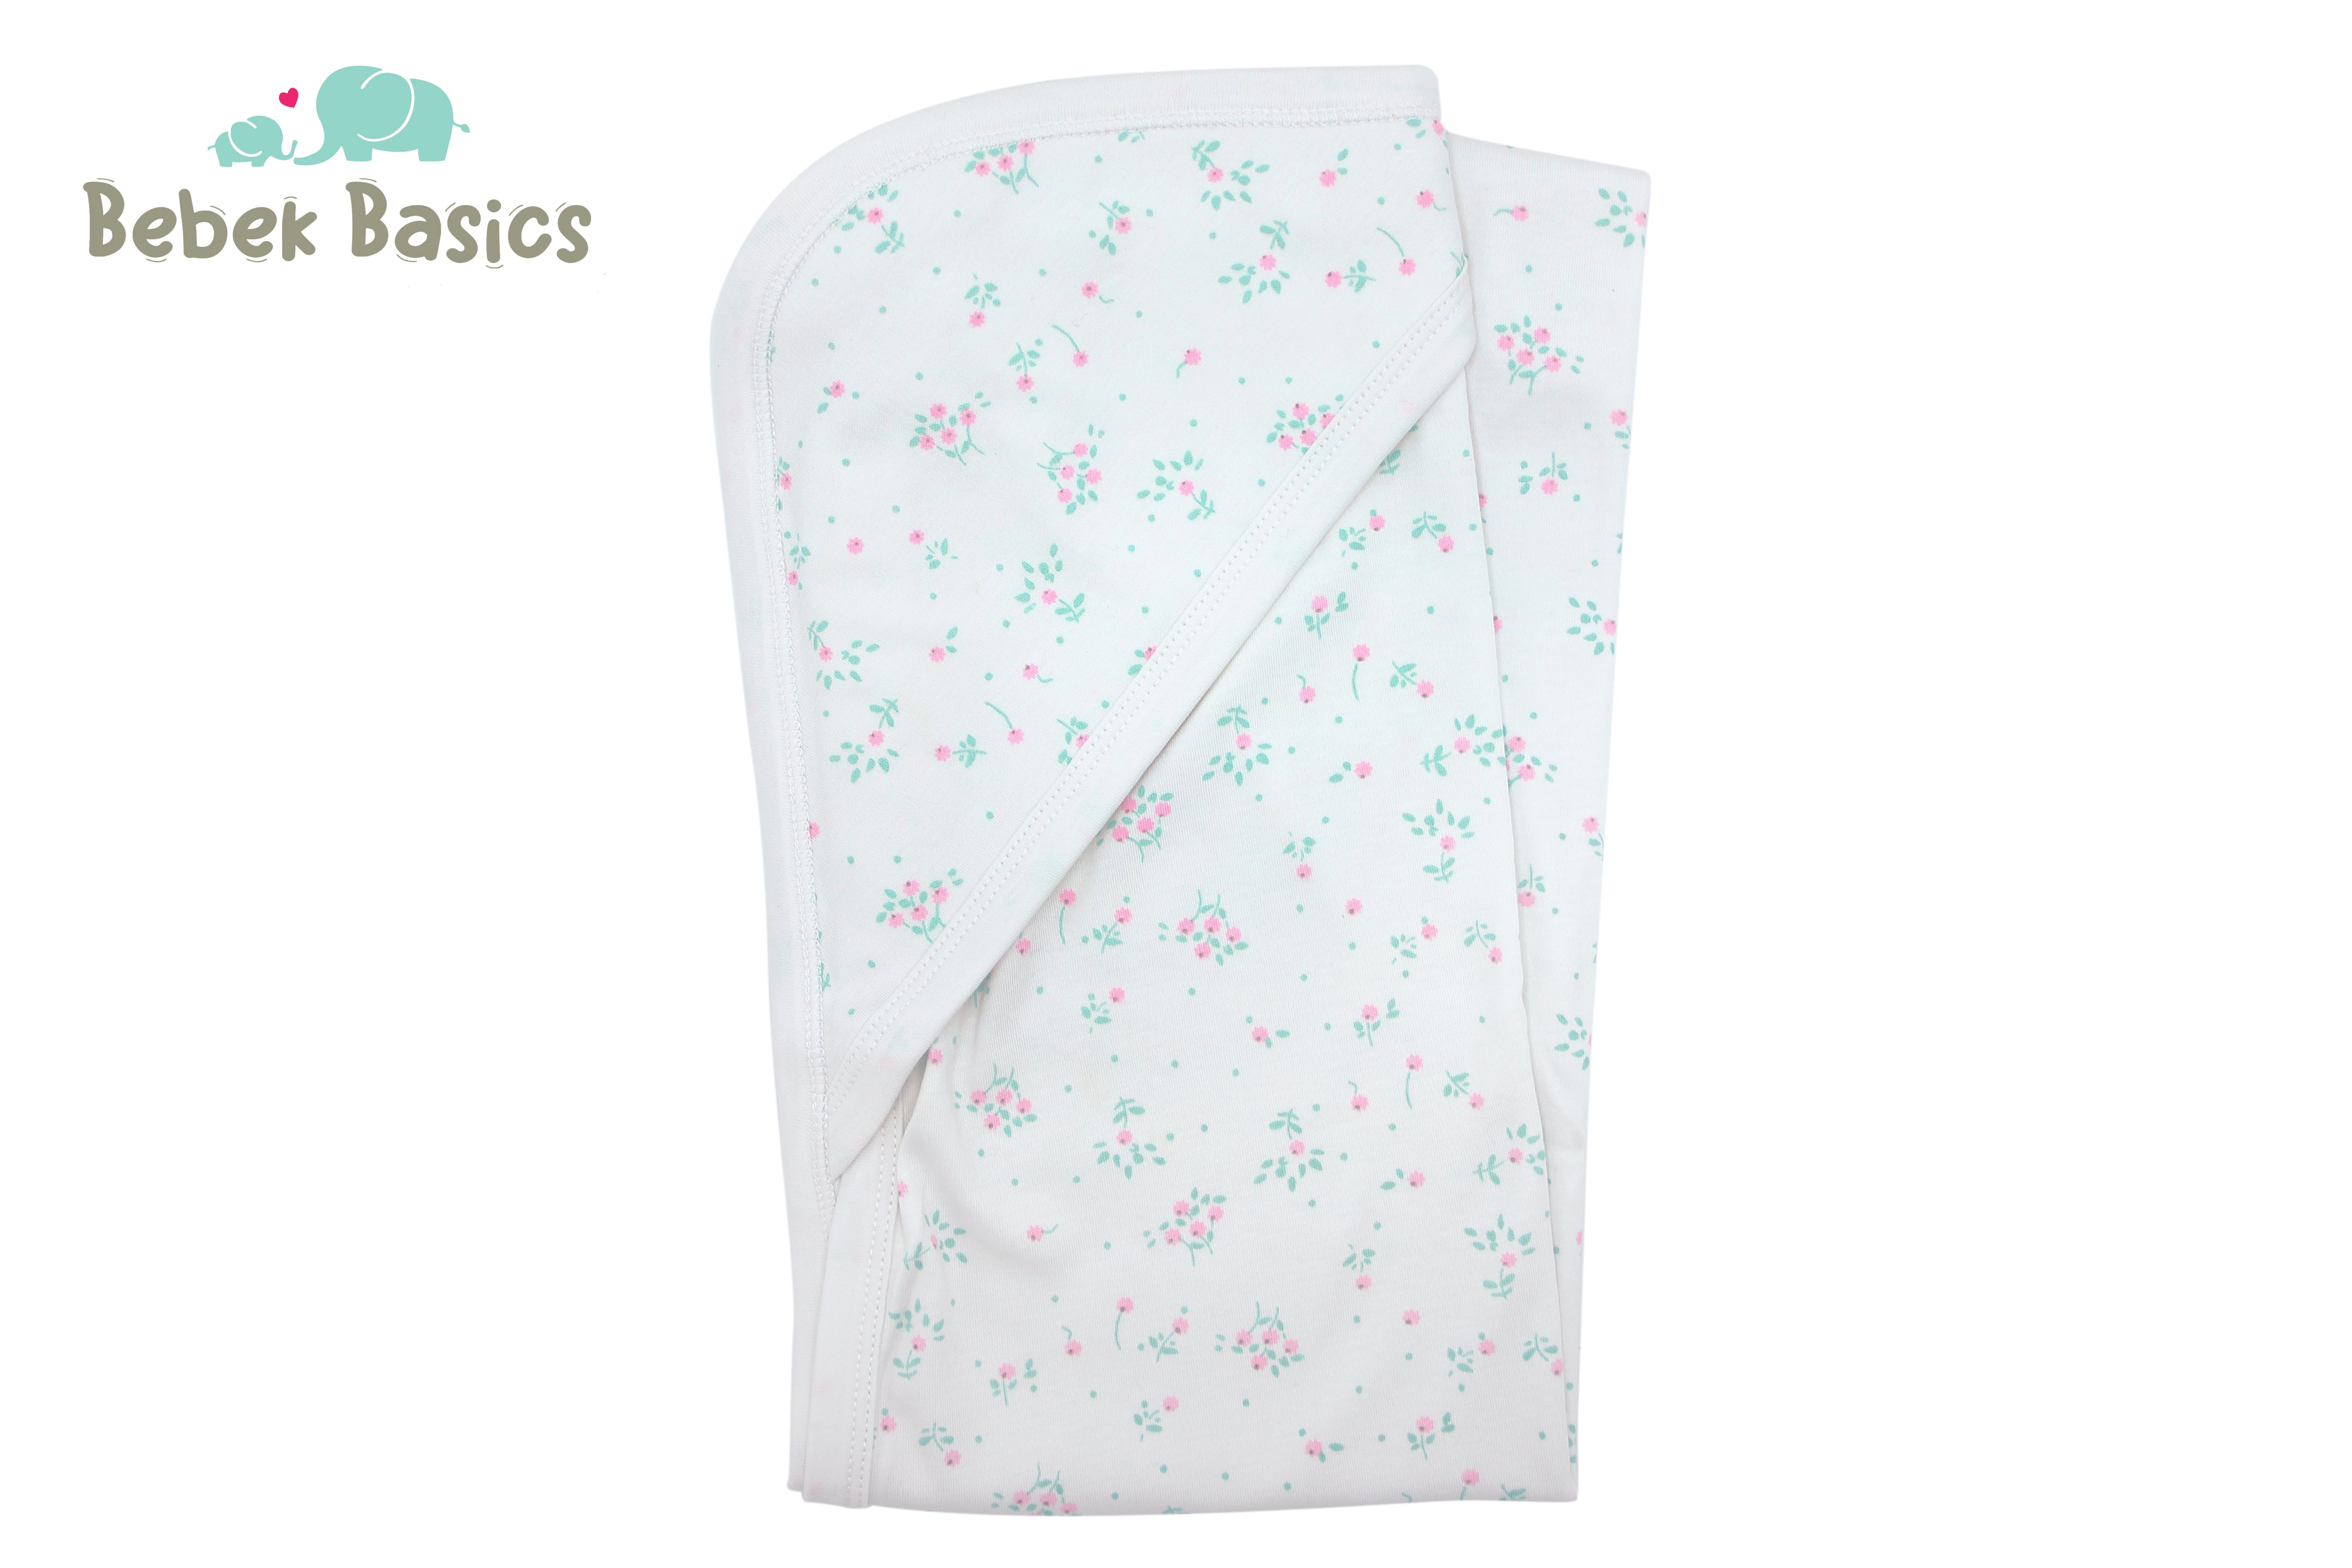 BABY HOODED WRAPPING SHEET - 31745